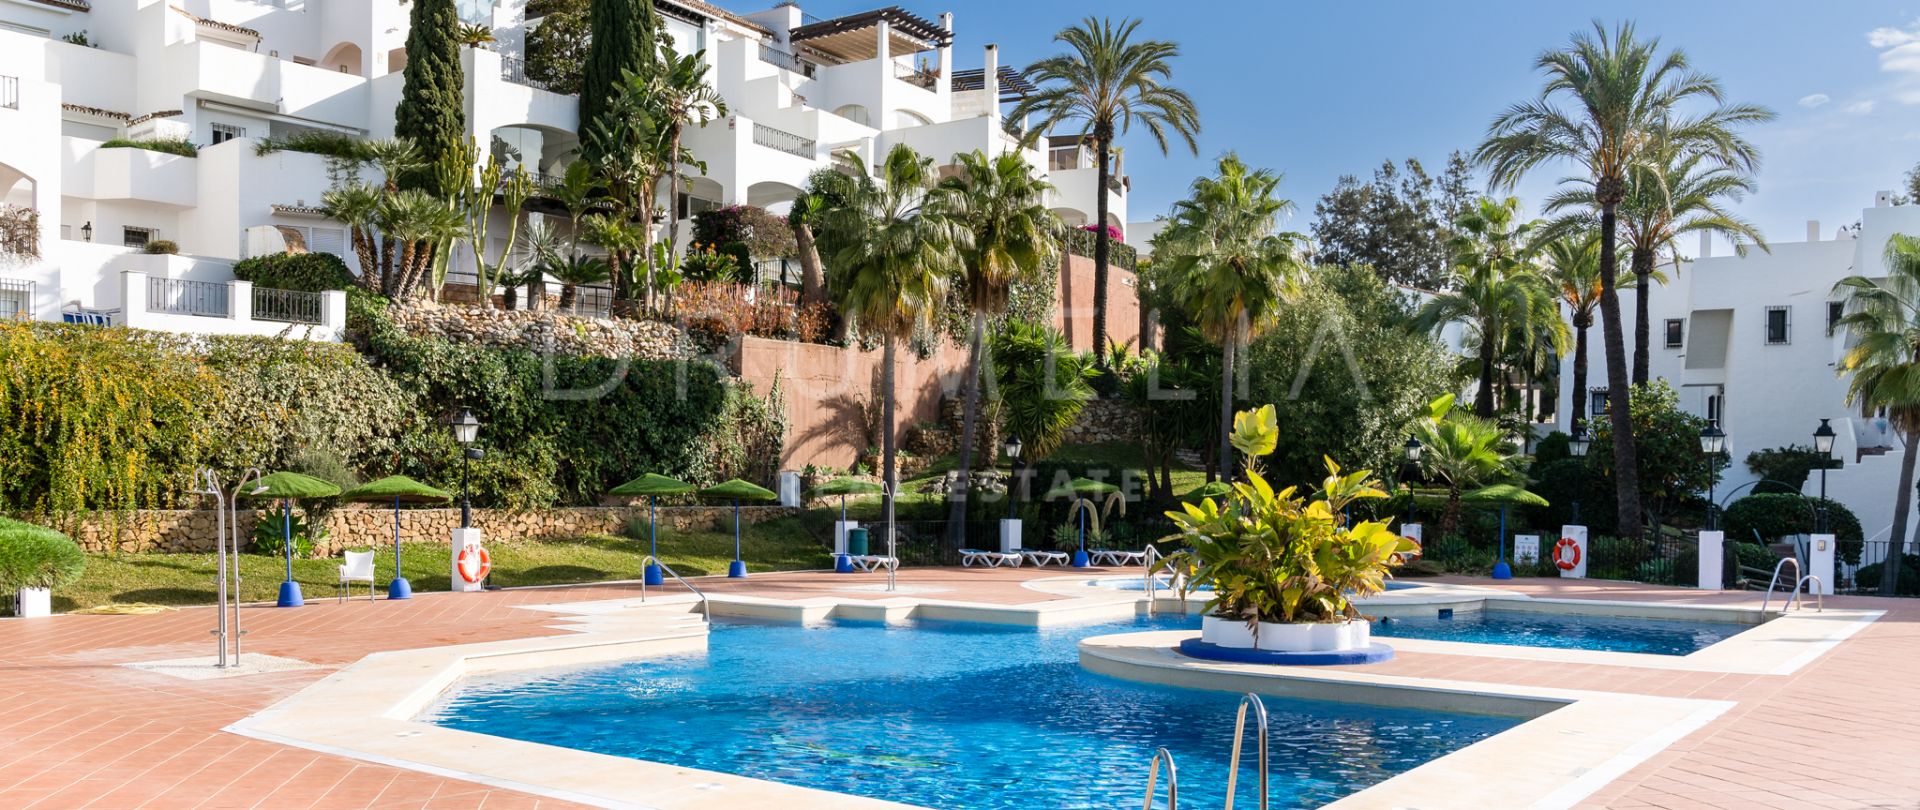 Beautiful, newly renovated modern townhouse in Club Sierra, Golden Mile of Marbella